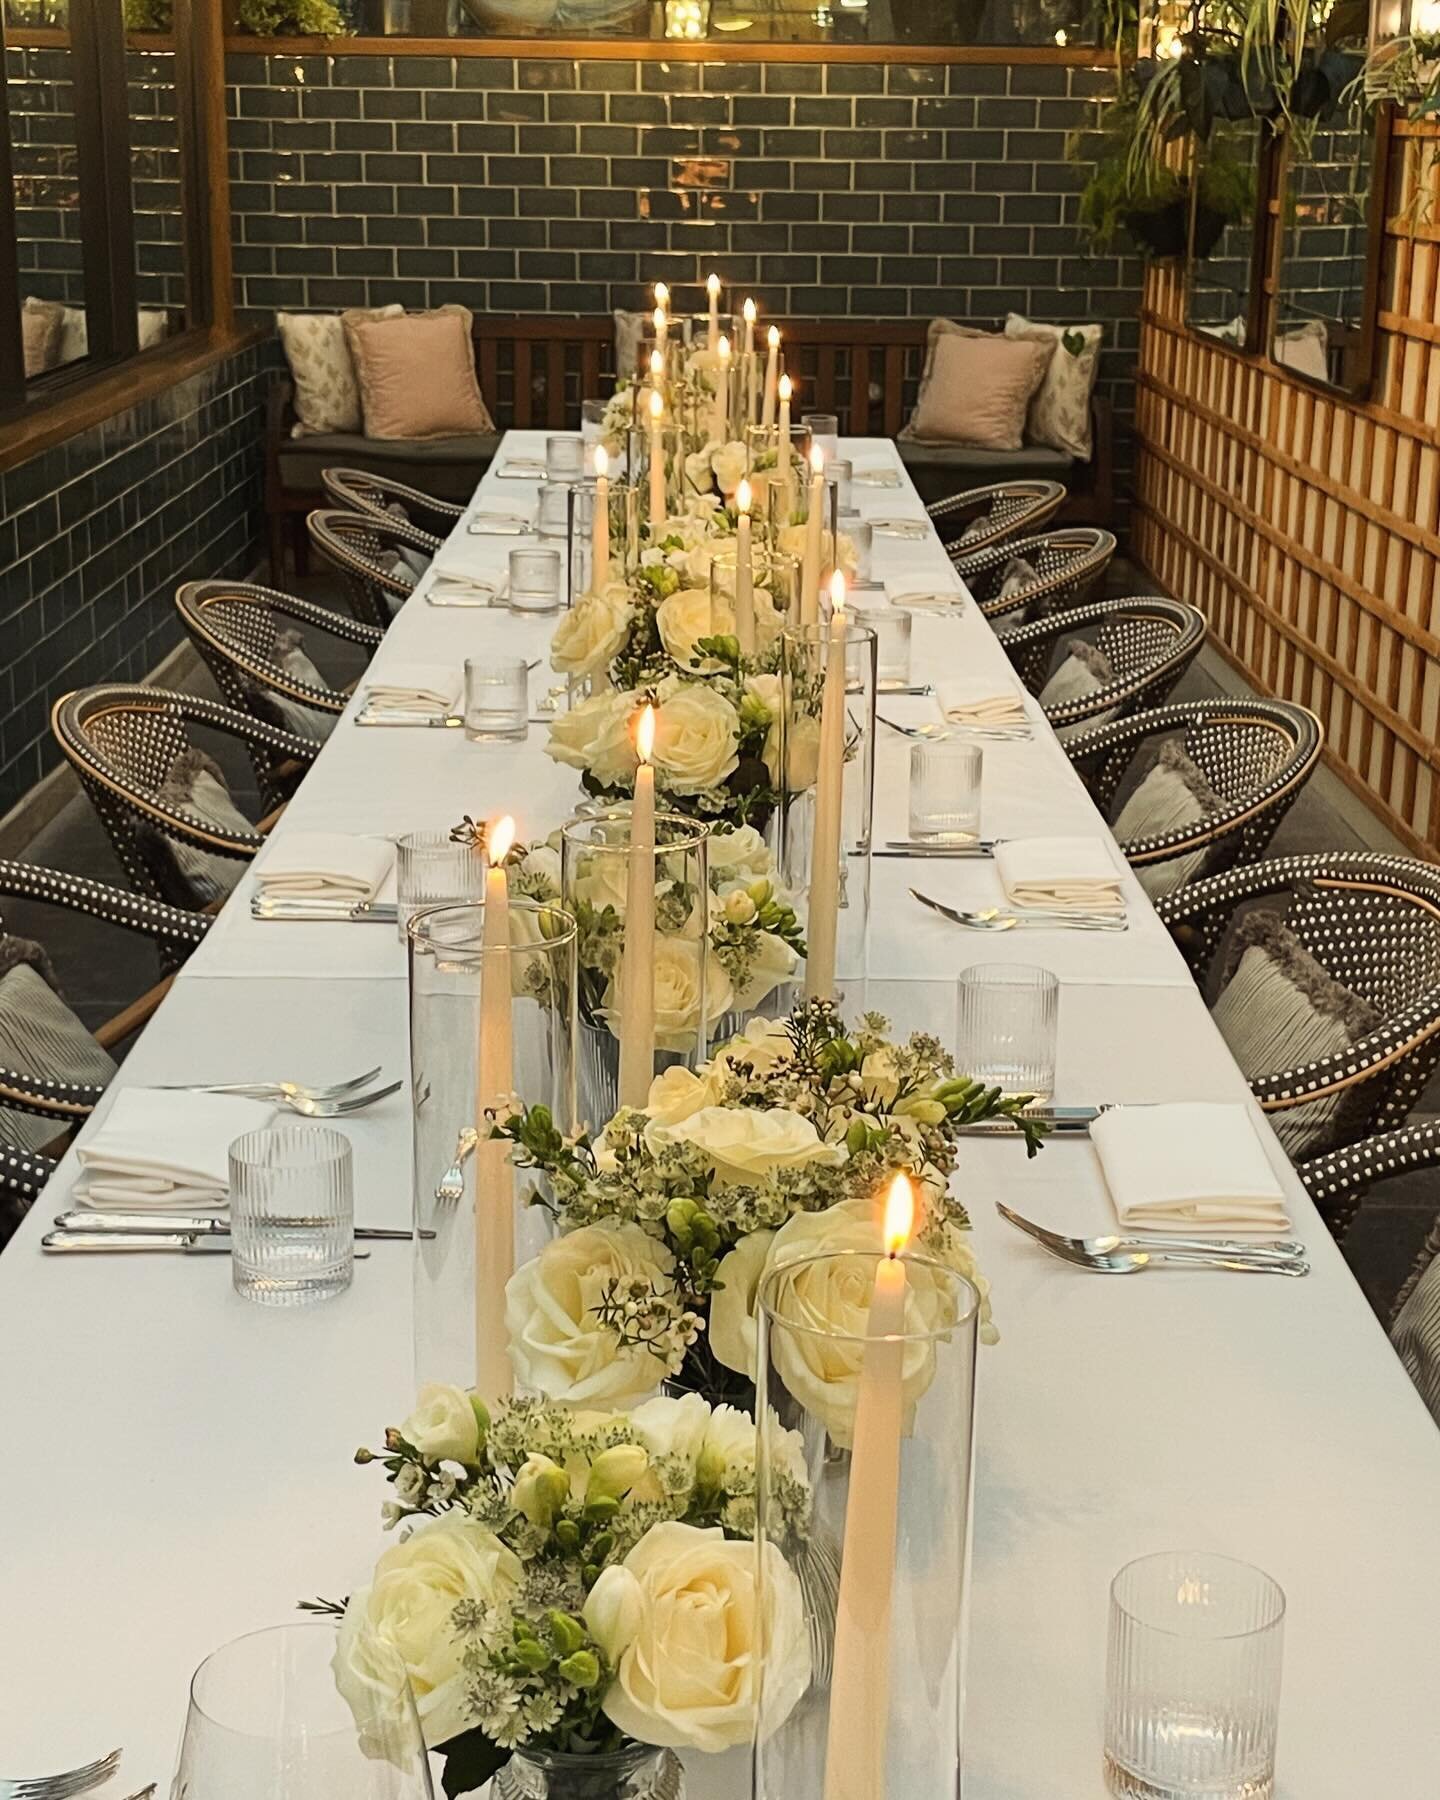 An intimate candlelit dinner last night at Gleneagles Townhouse 🤍 Beautiful white roses, freesia &amp; astrantia with hand dipped ivory candles in glass hurricane vases ✨

@chanelofficial 
@gleneaglestownhouse